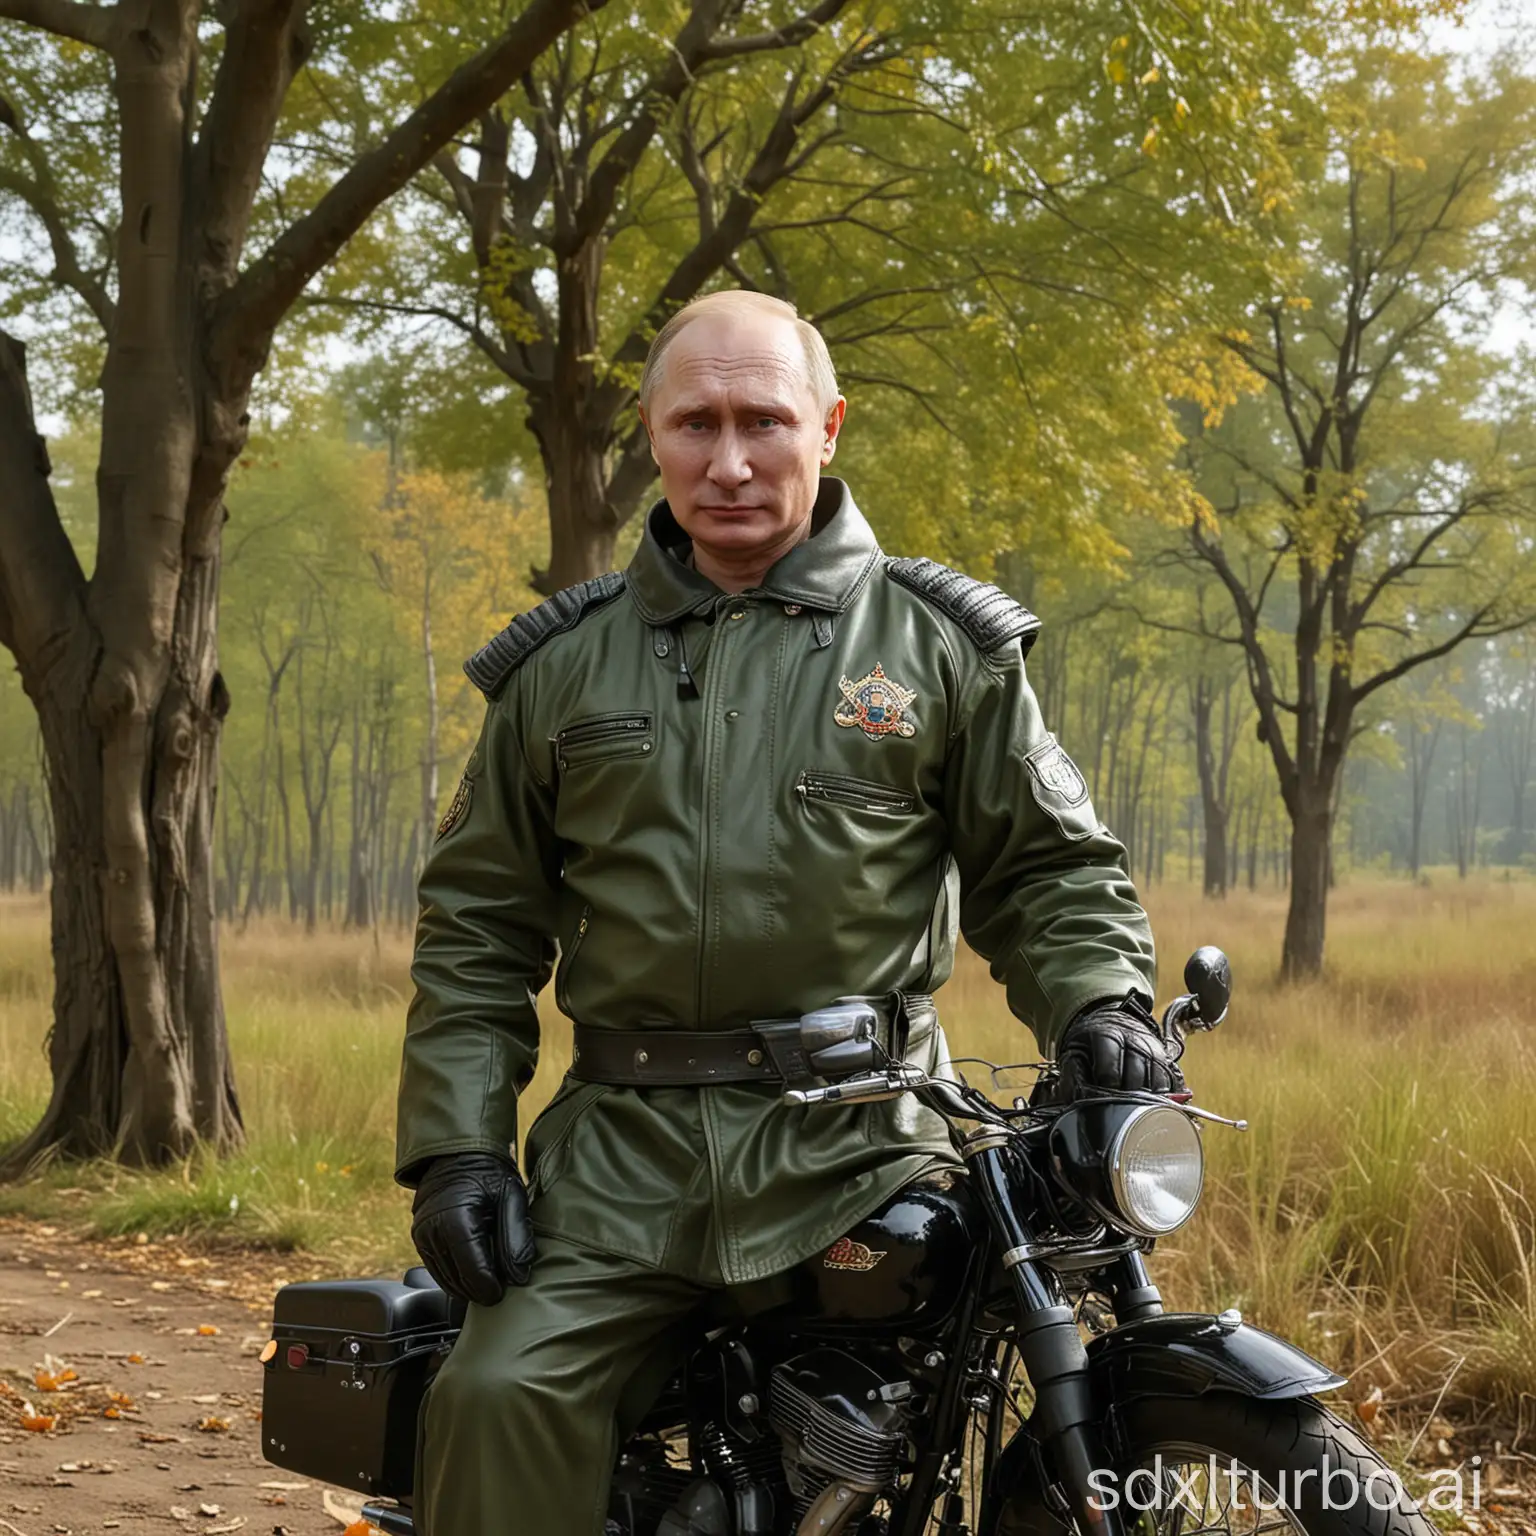 ultradetailed, uplooking view, 65 years old real face putin, real look hand leather glove, wear Taekwondo robe, ride superlong harley davision light green motorcycle, half hill grassland block by a huge taller durain tree, autumn, cloudy,